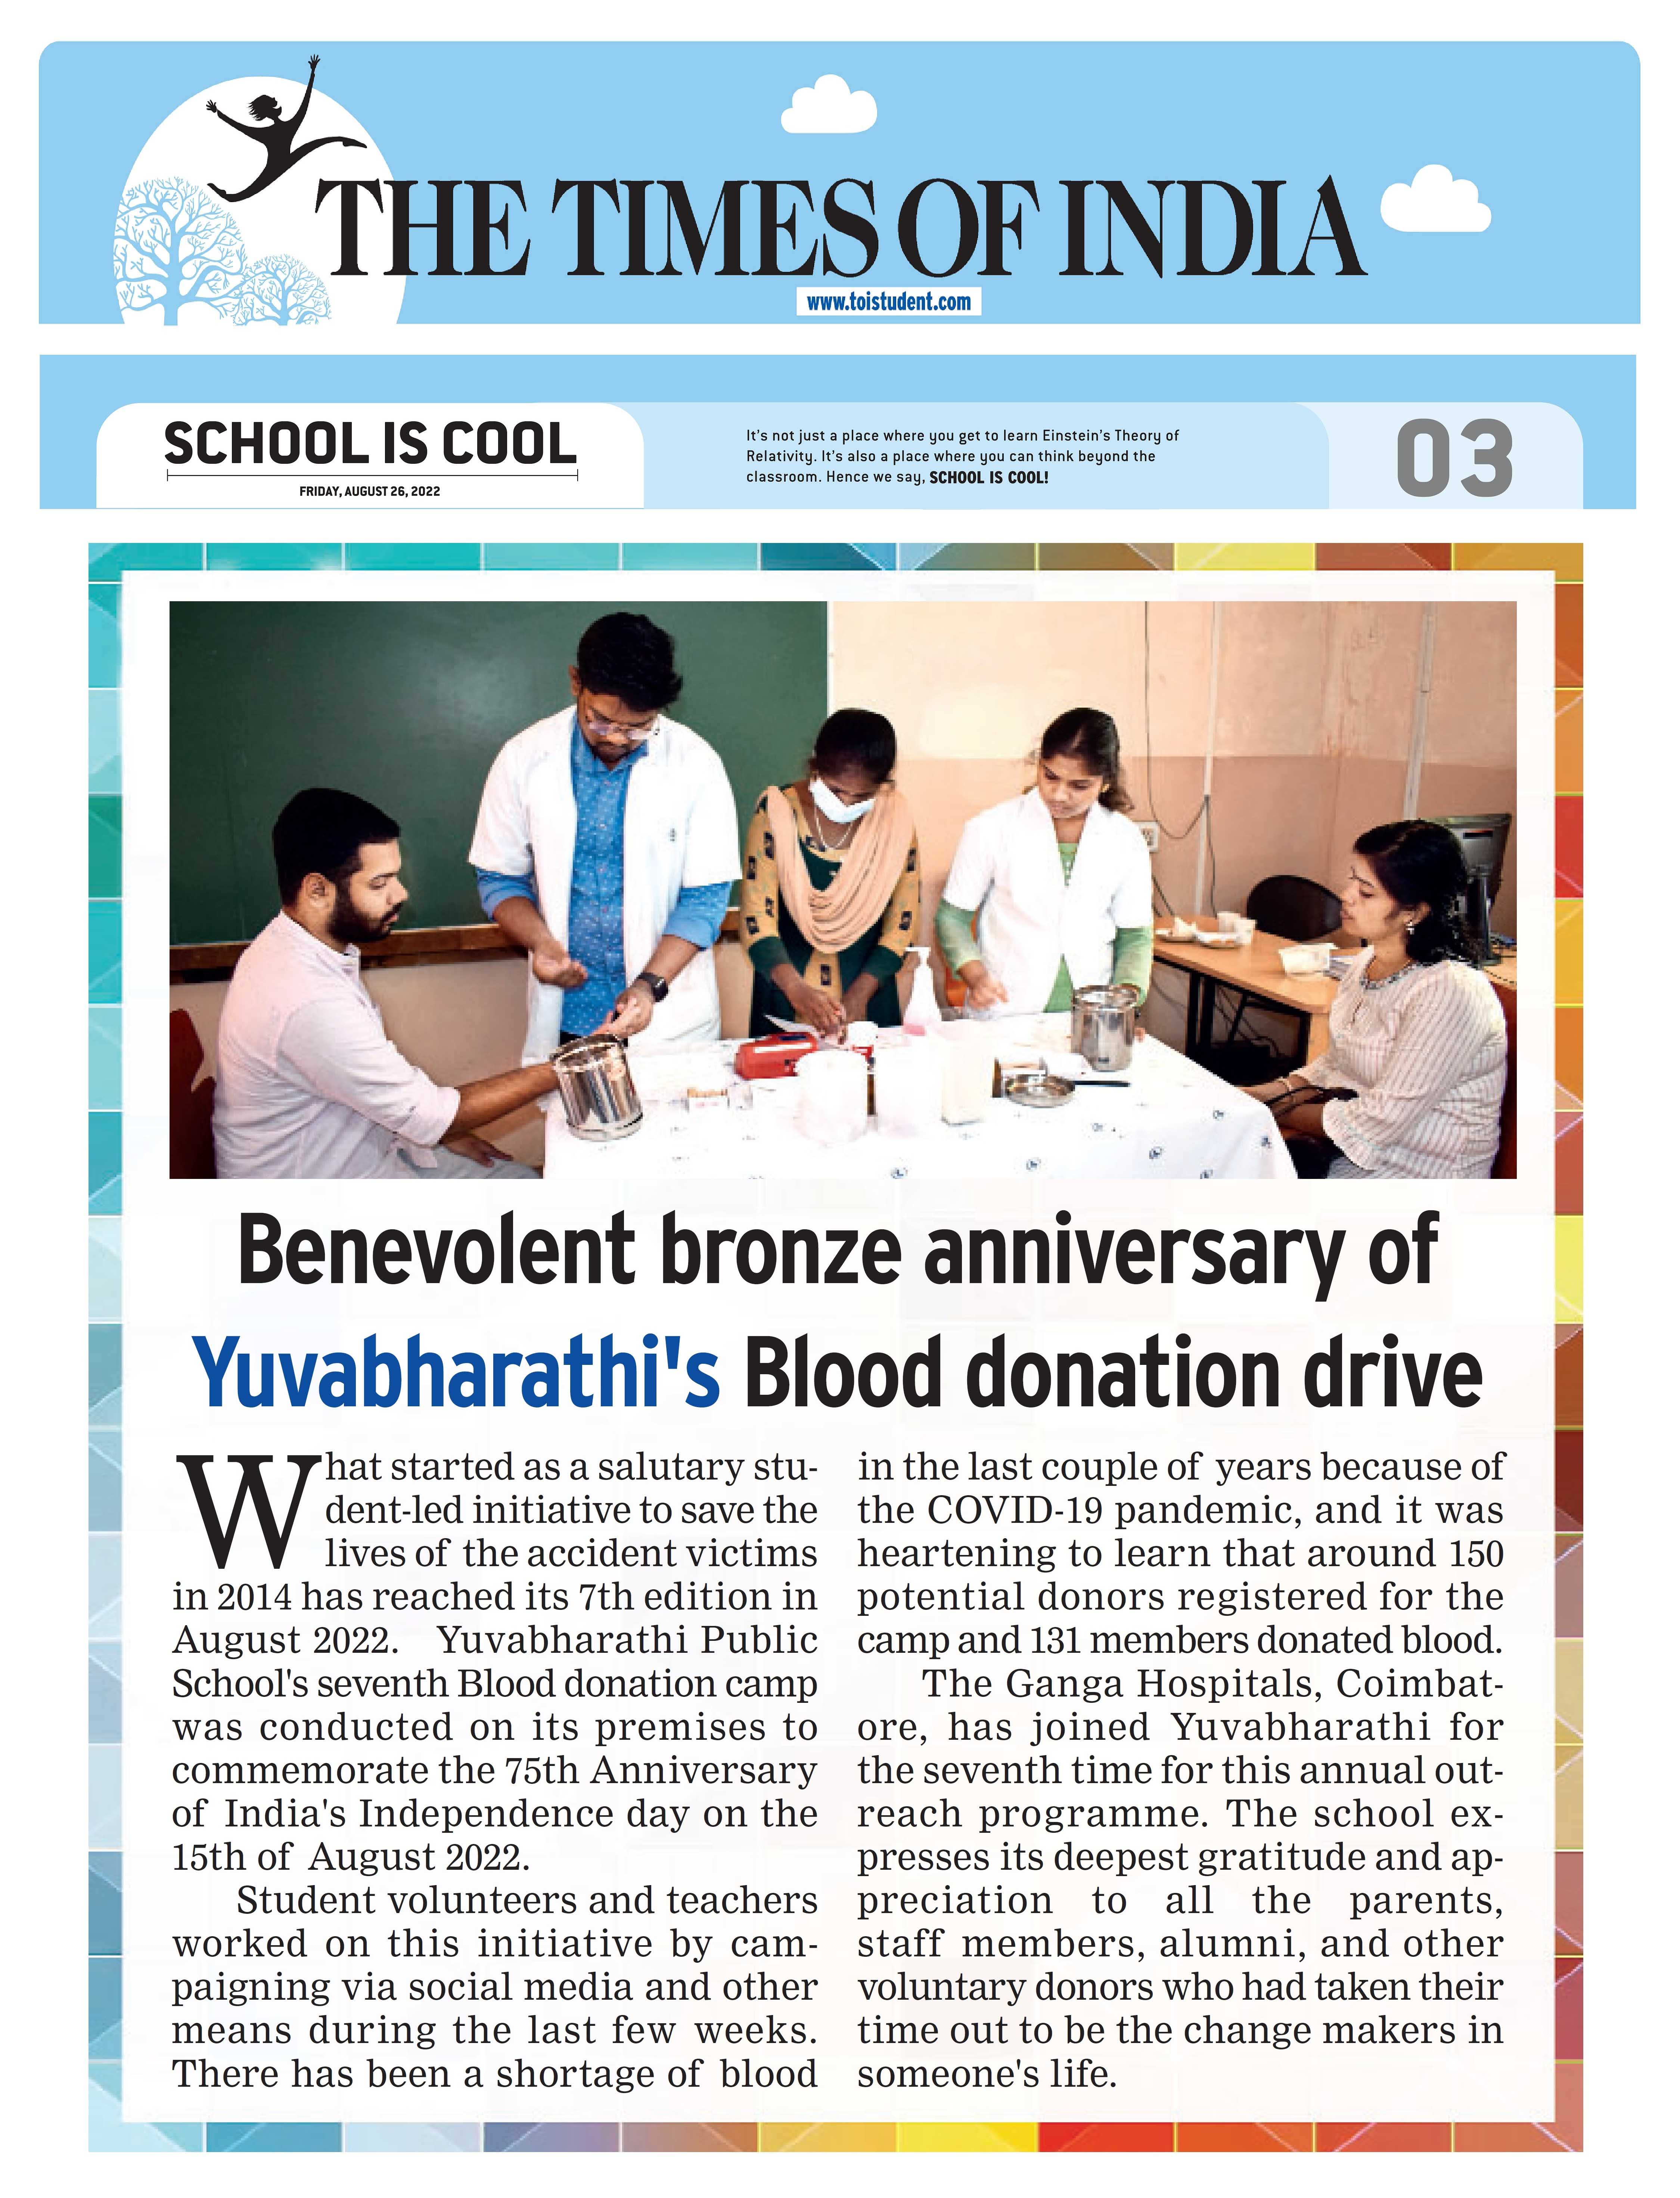 Yuvabharathi Public School's Blood donation camp | The Times of India NIE dated 28.08.2022.